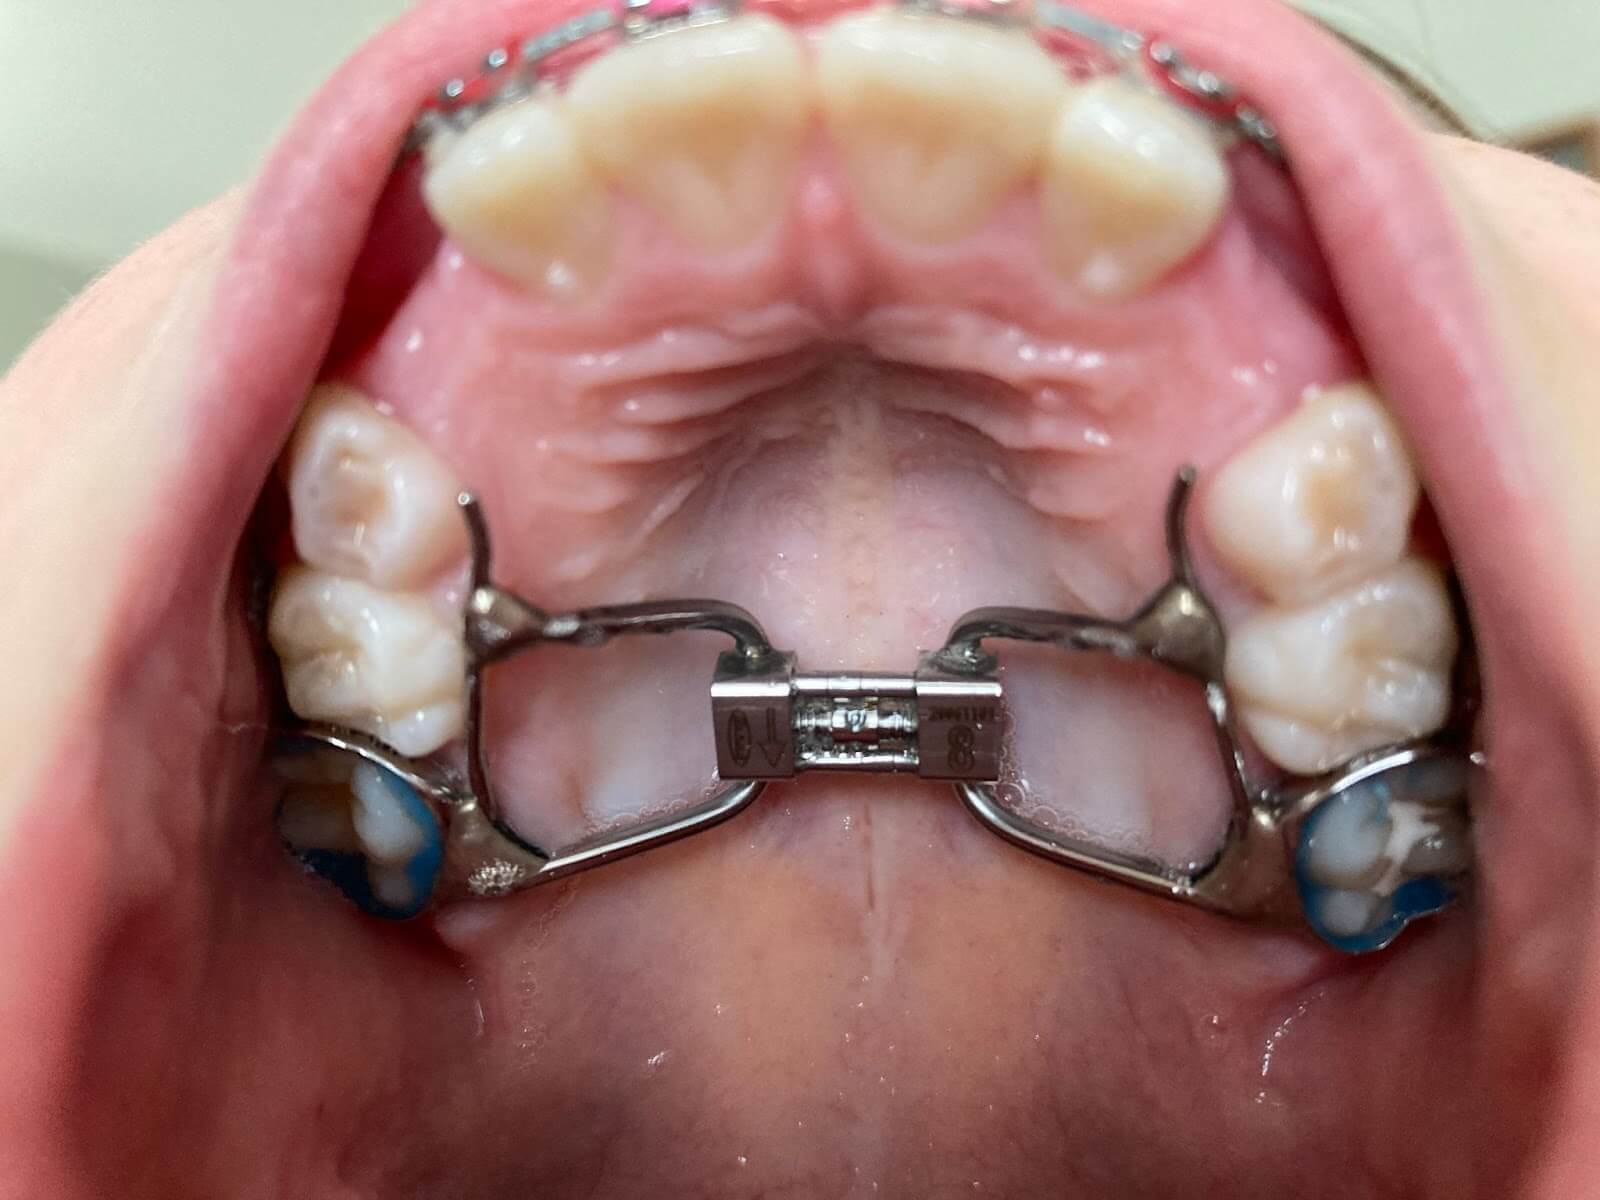 View of Palate expander inside a mouth